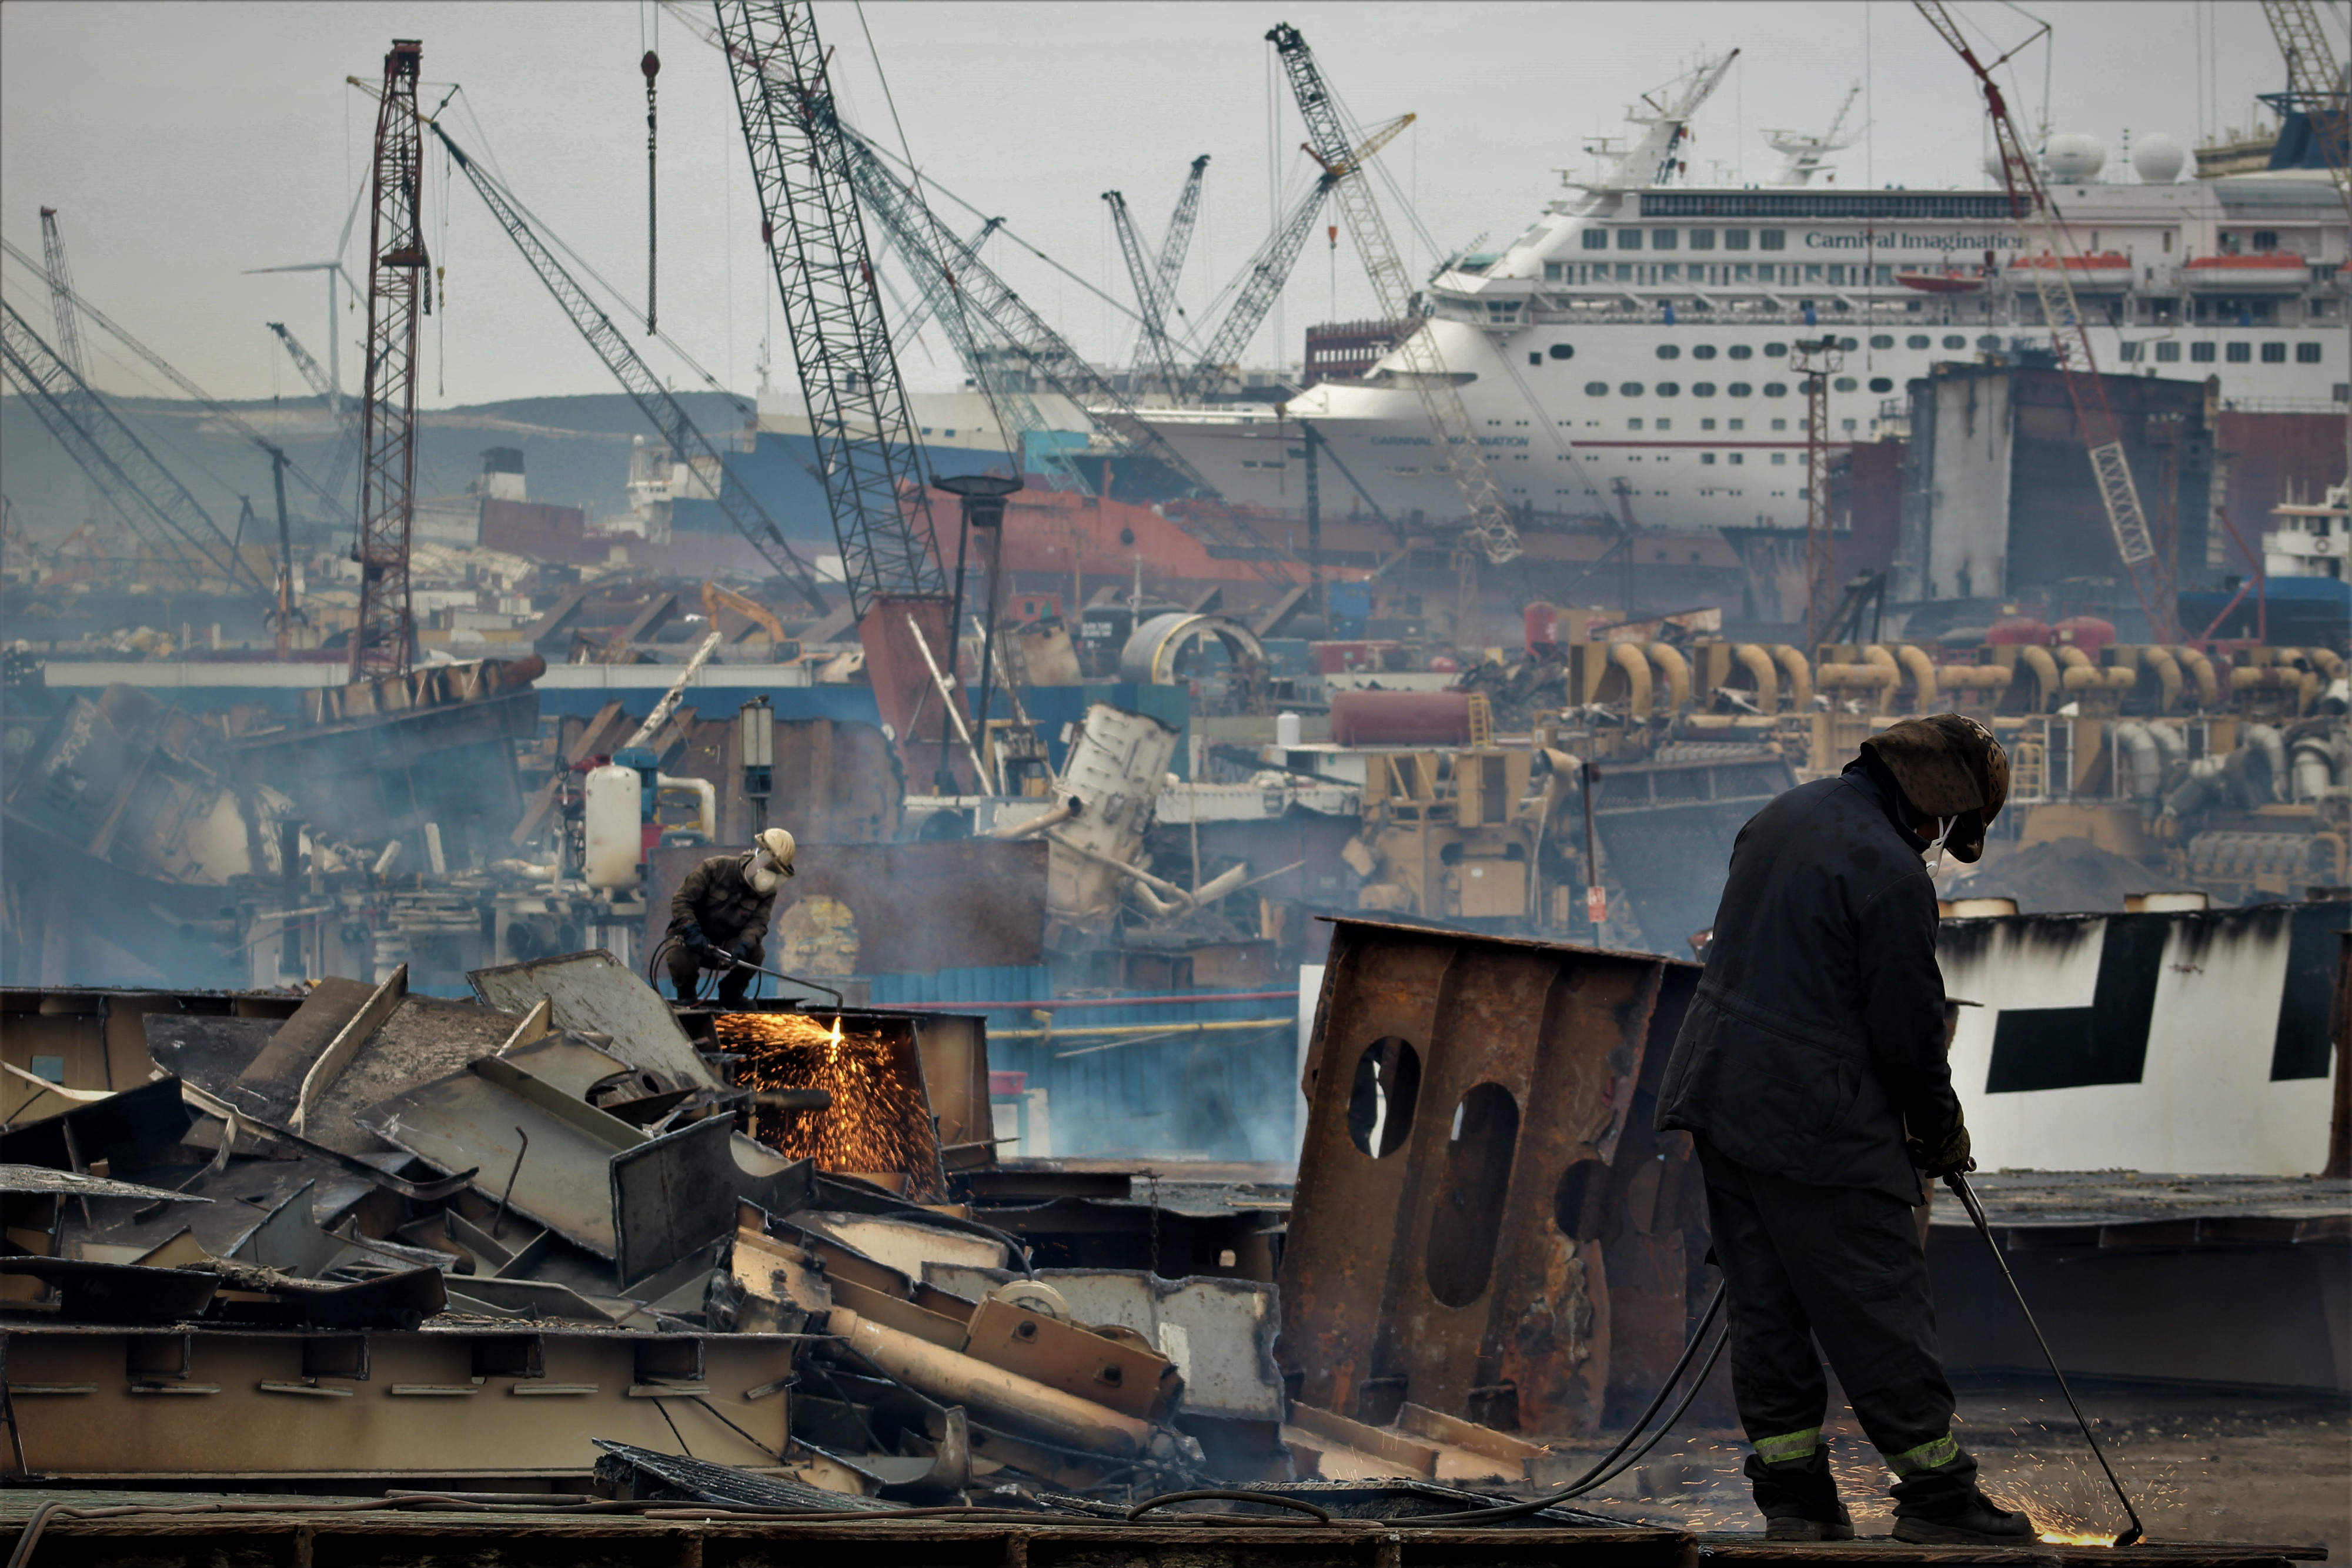 Aliaga sees a variety of vessels of disassembled, a process often completed in just a few months (MEE/Nimet Kirac)